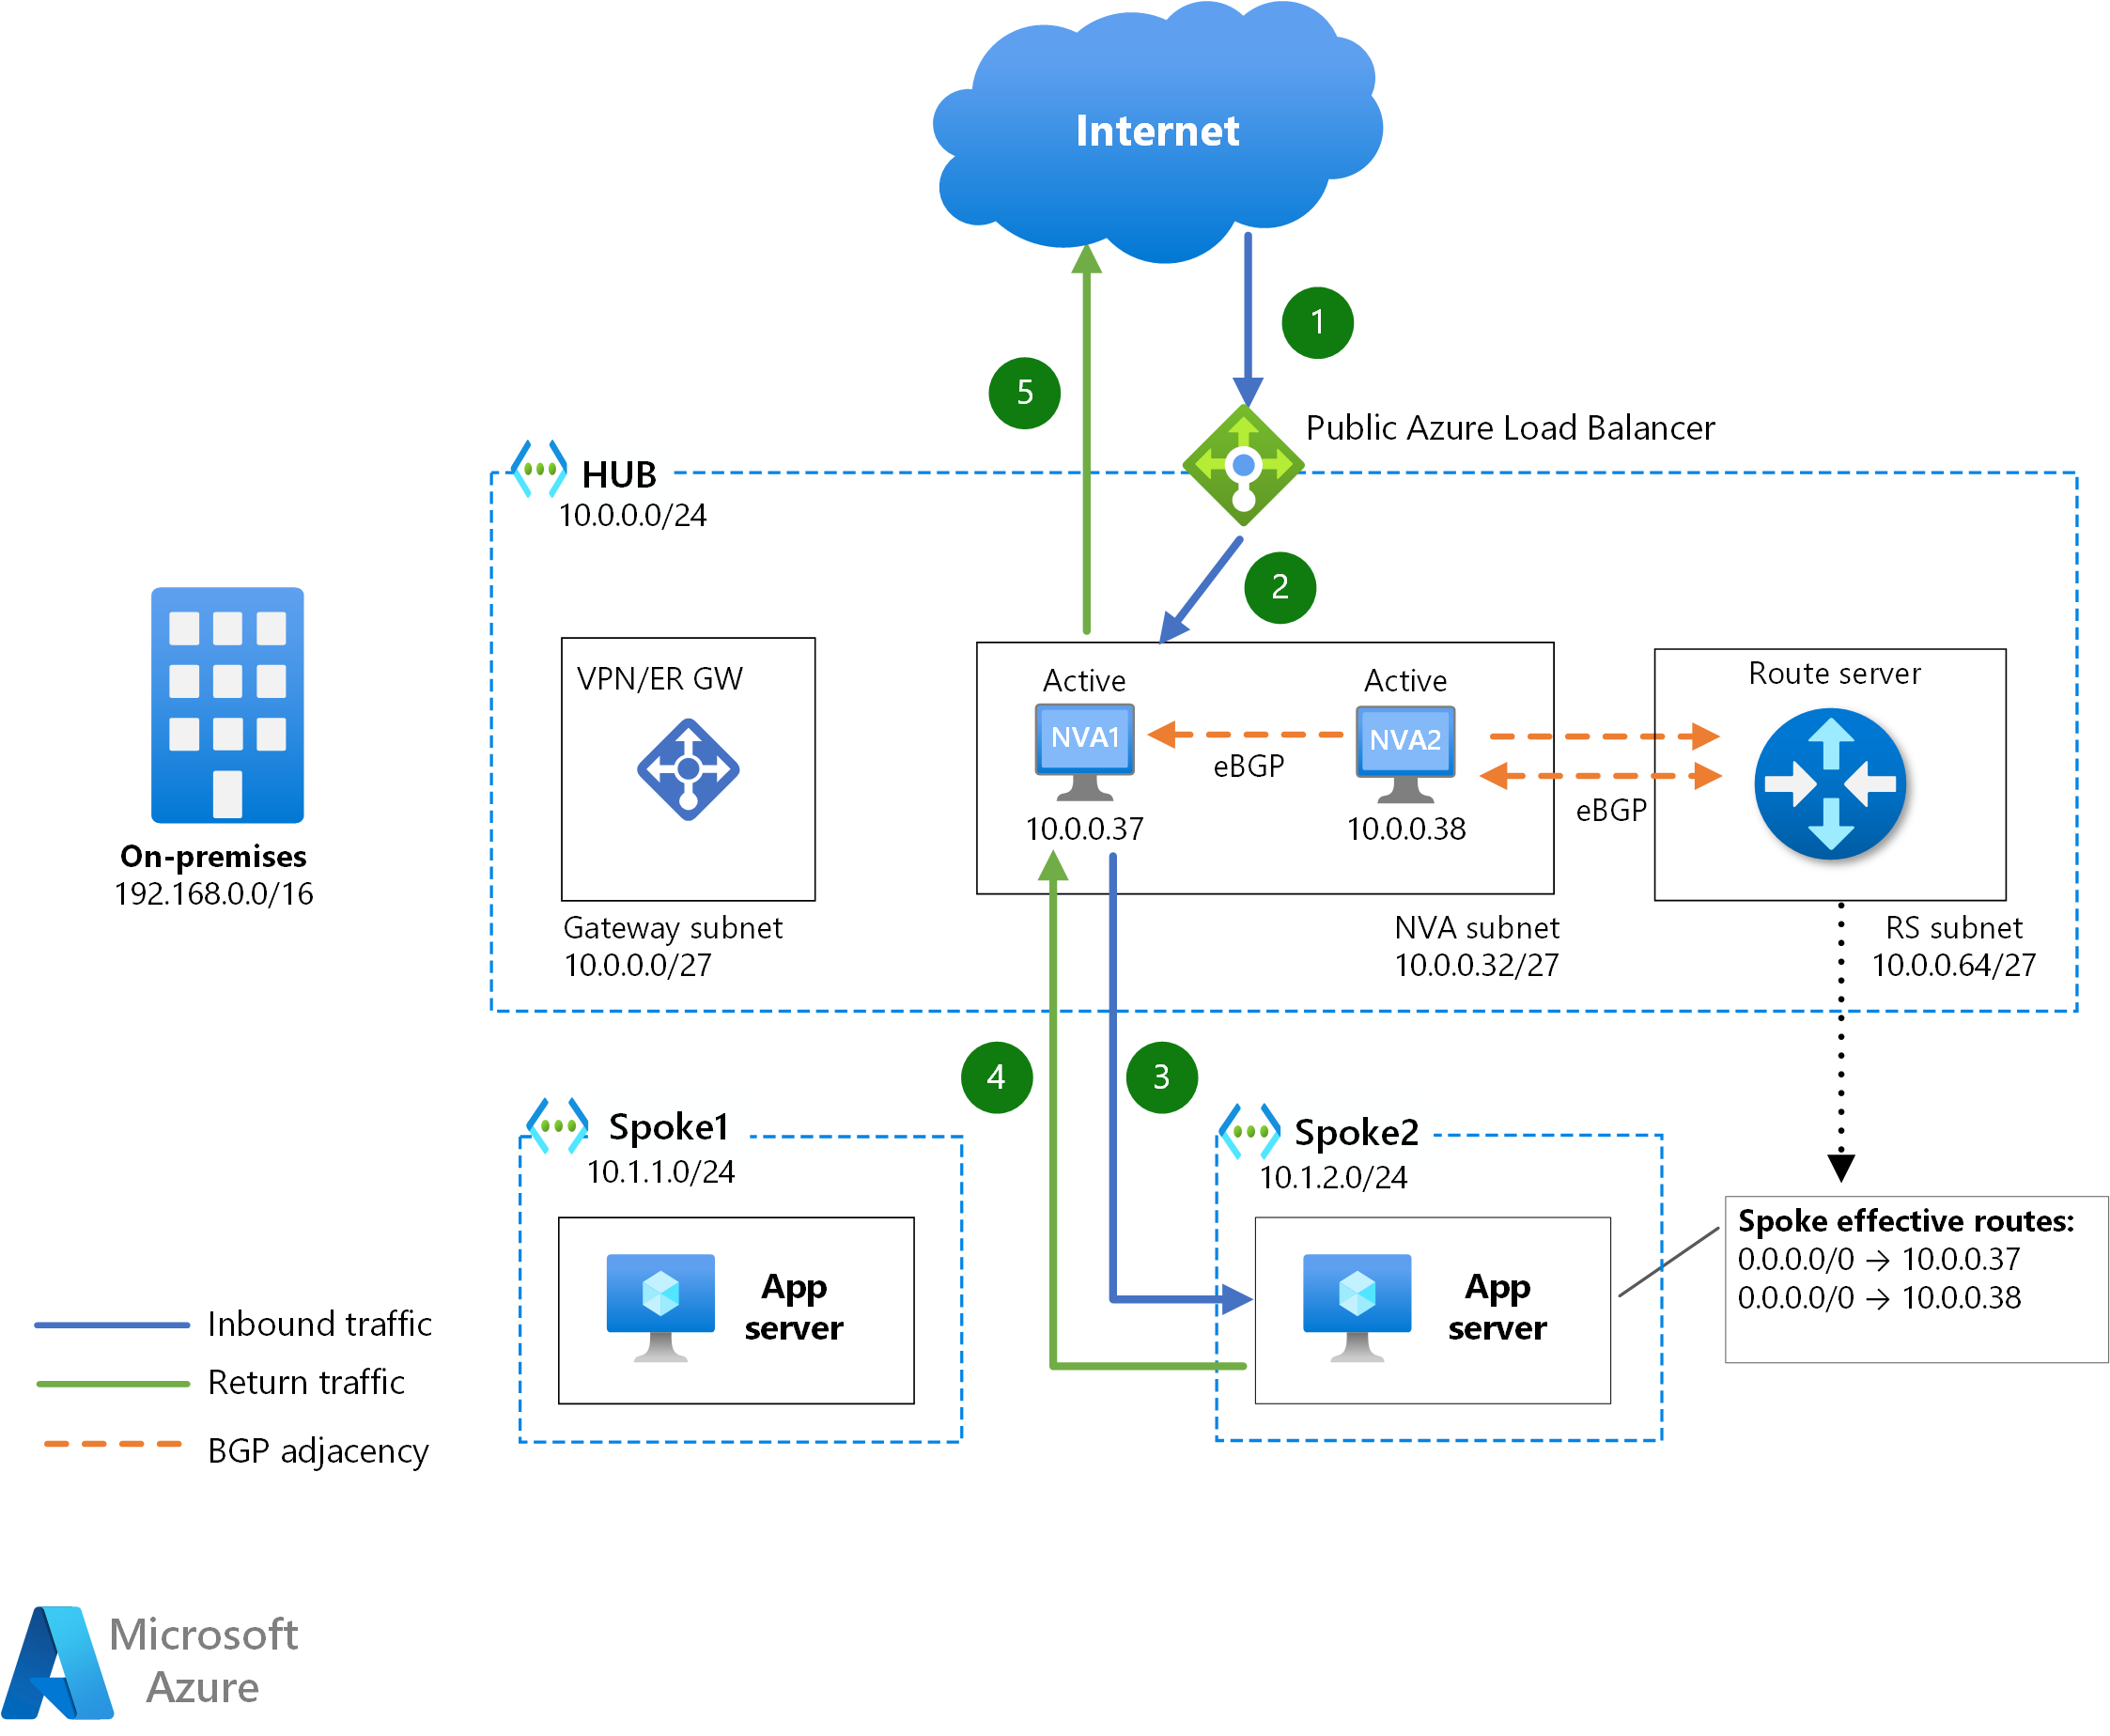 Deploy highly available NVAs - Azure Architecture Center 